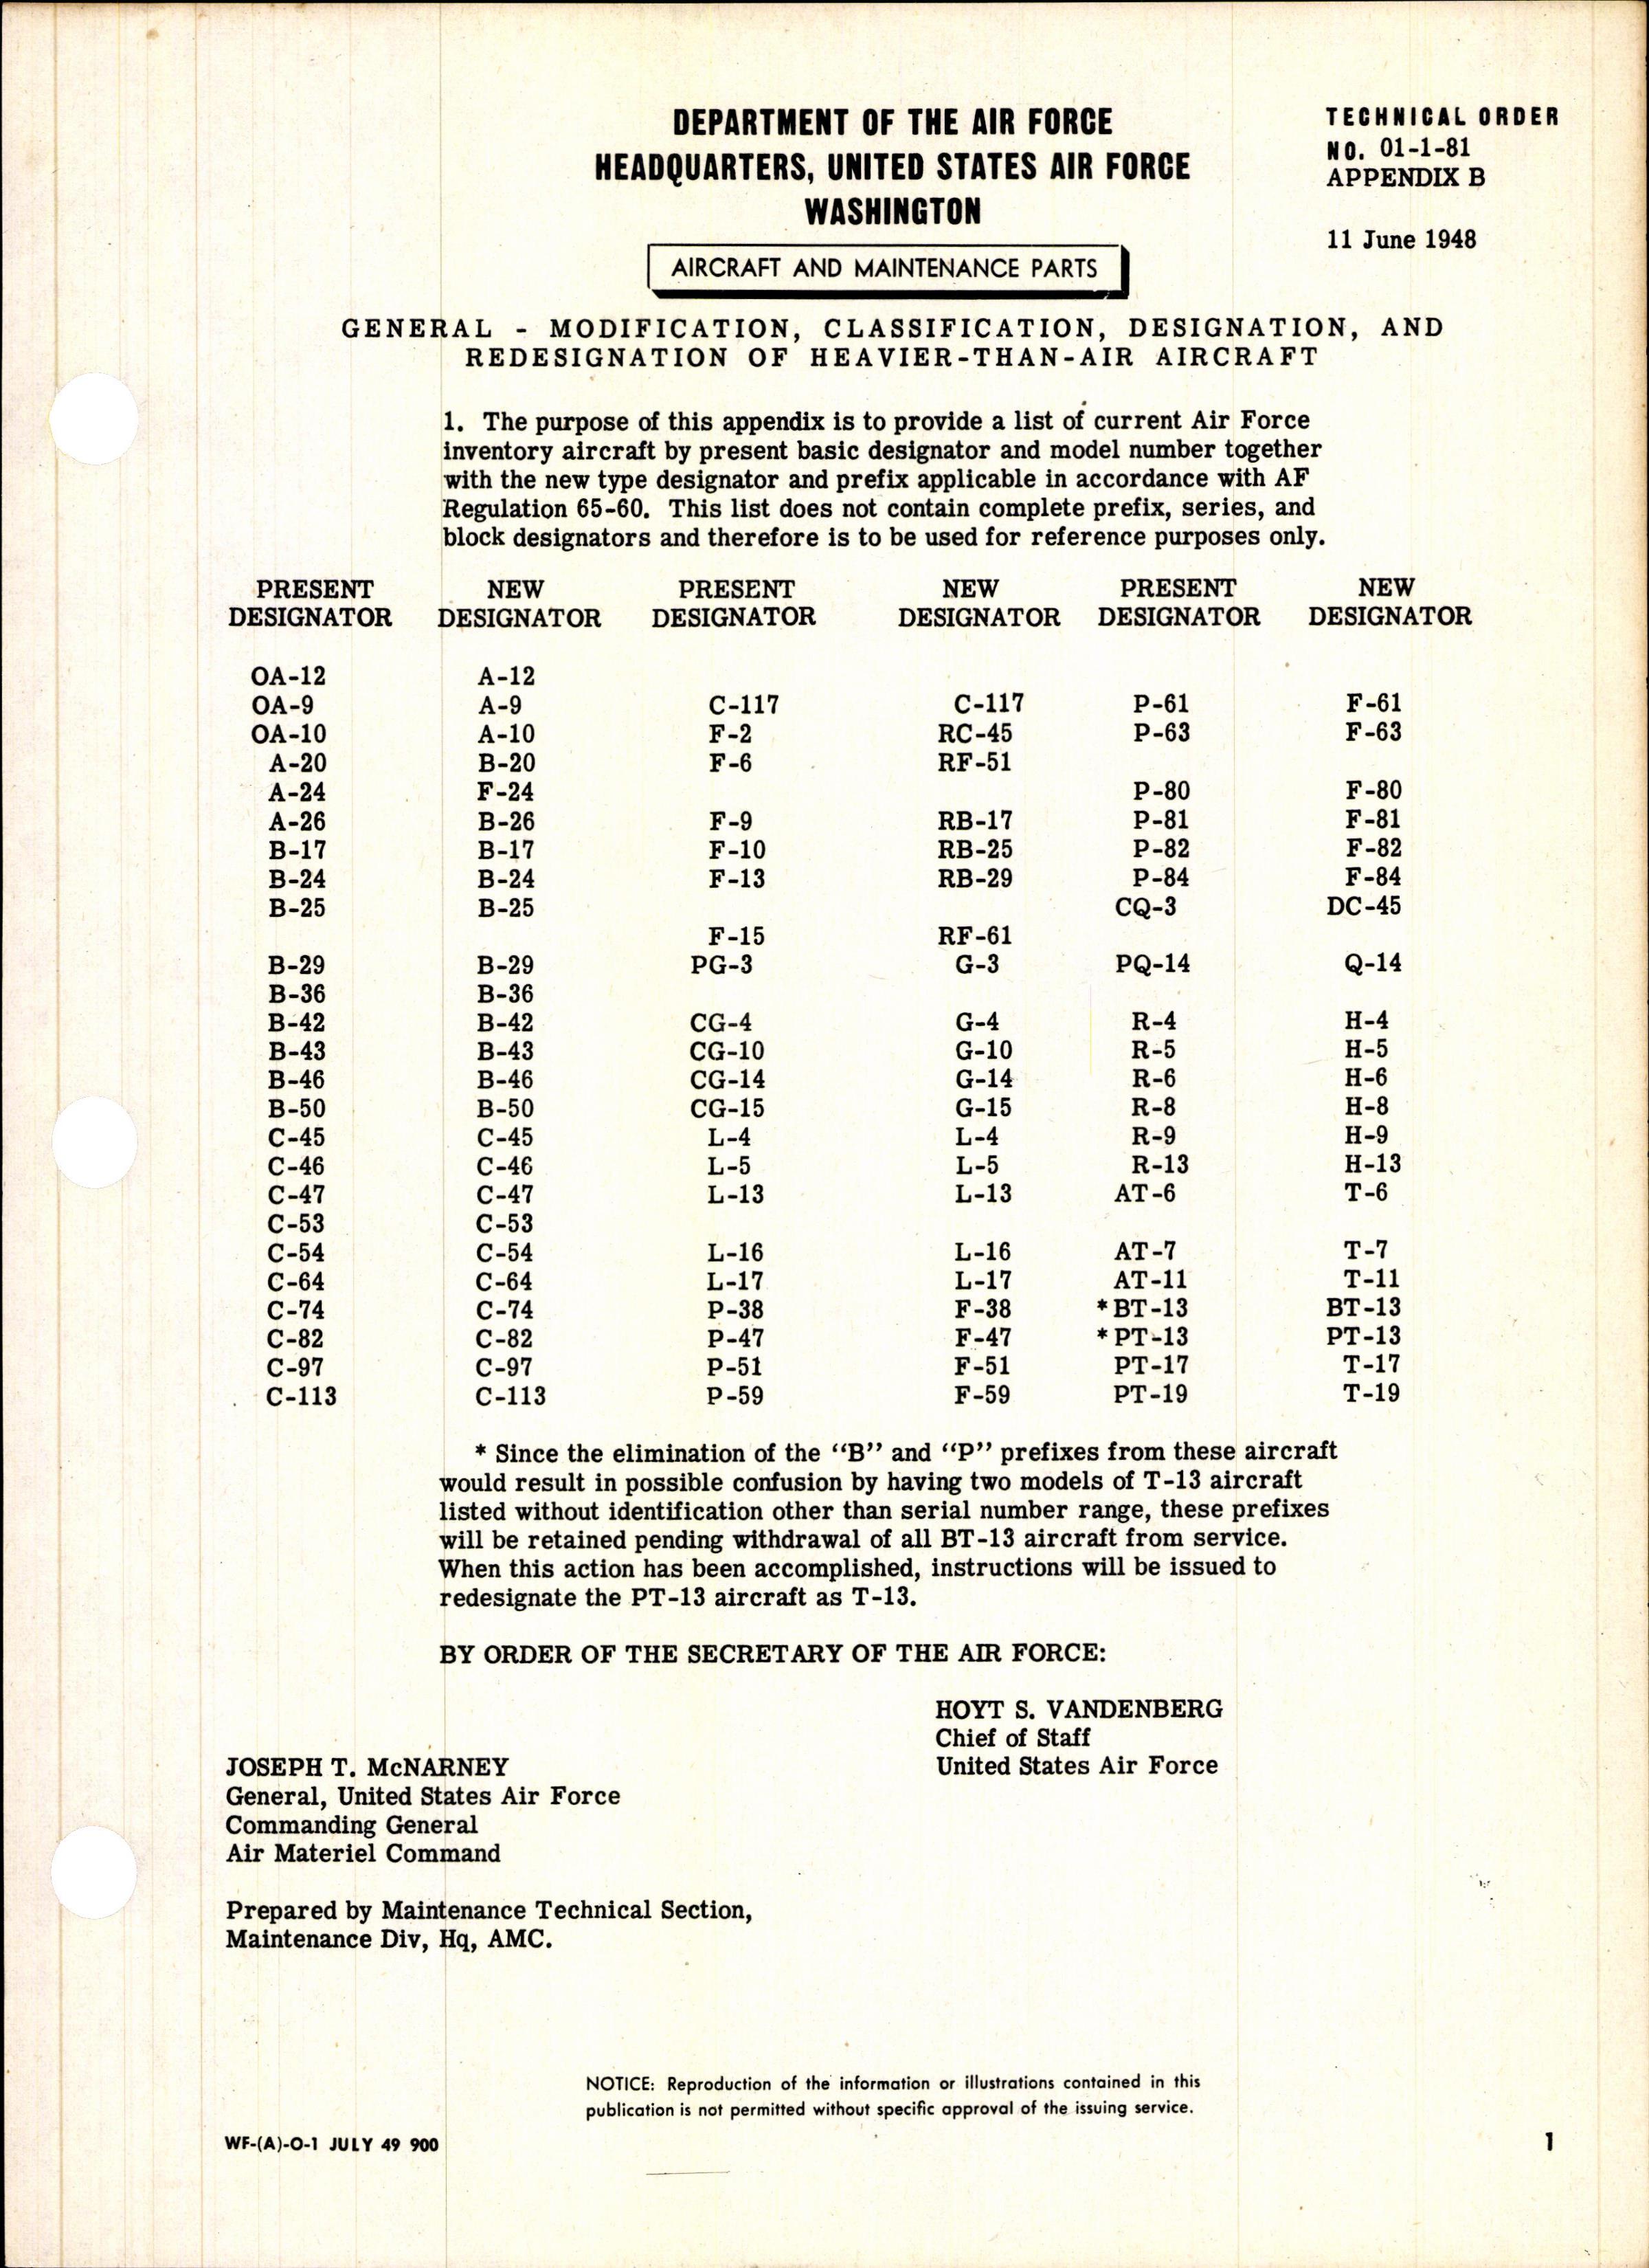 Sample page 1 from AirCorps Library document: Modification, Classification, (Re)Designation of Heavier than Air Aircraft